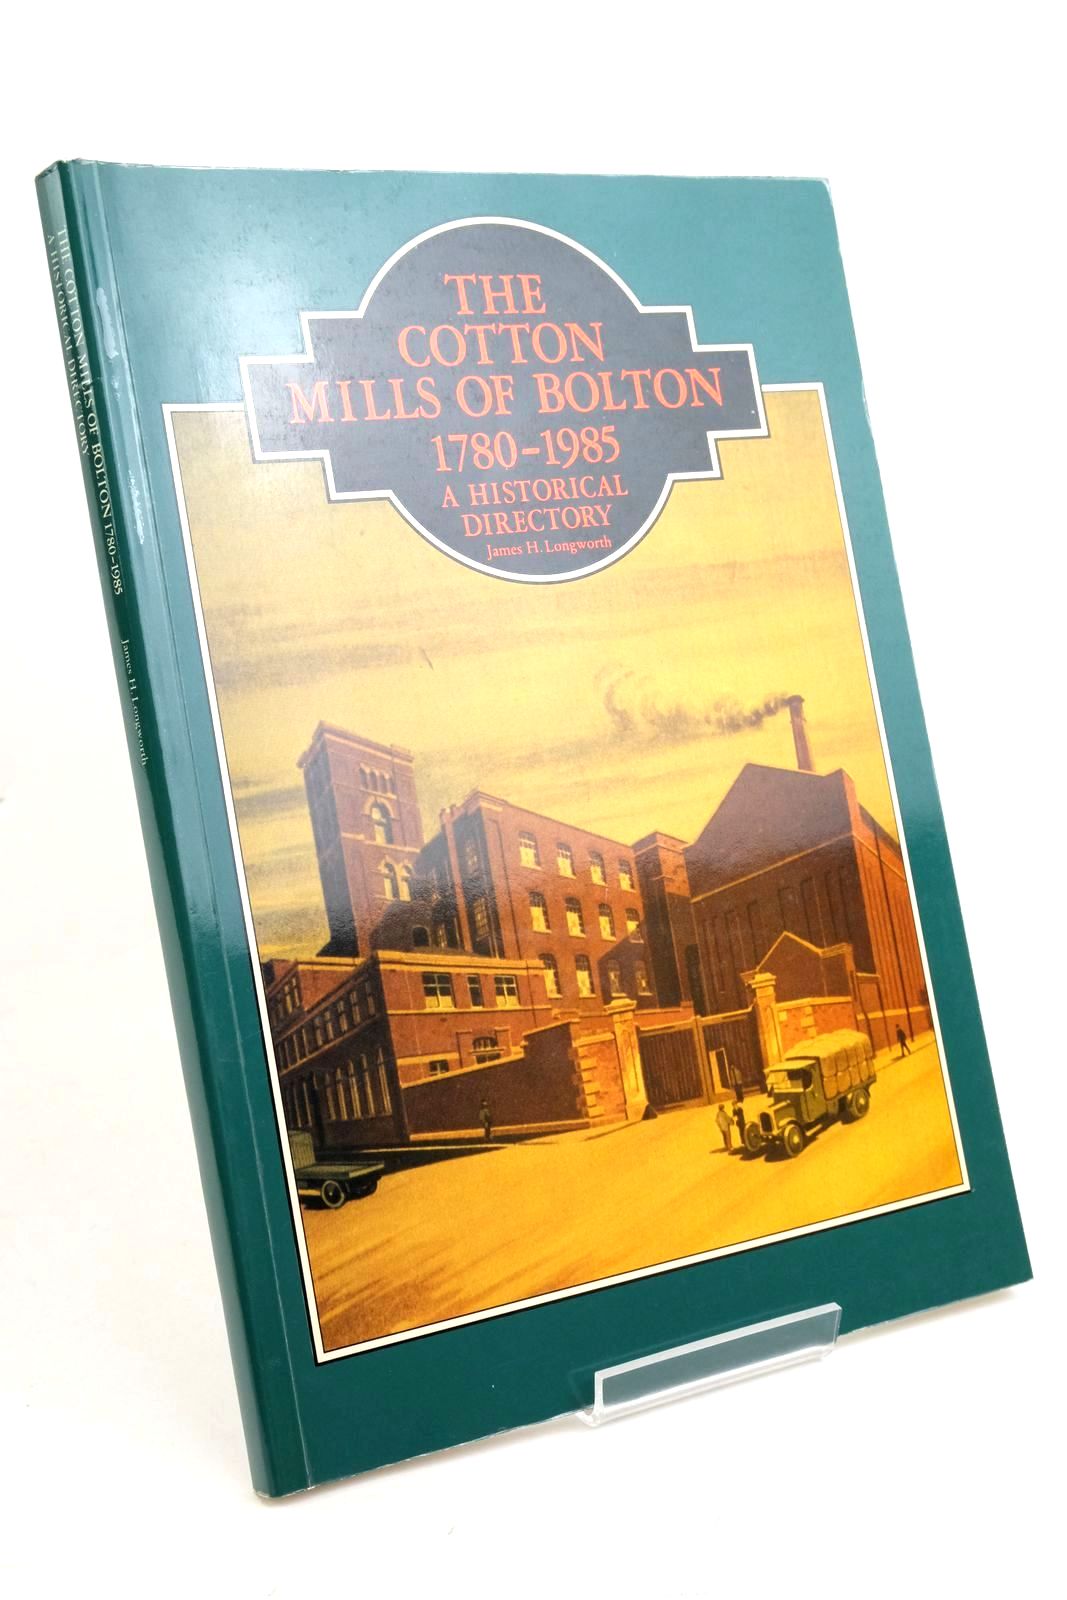 Photo of THE COTTON MILLS OF BOLTON 1780-1985 A HISTORICAL DIRECTORY written by Longworth, James H. published by Bolton Museum And Art Gallery (STOCK CODE: 1322444)  for sale by Stella & Rose's Books